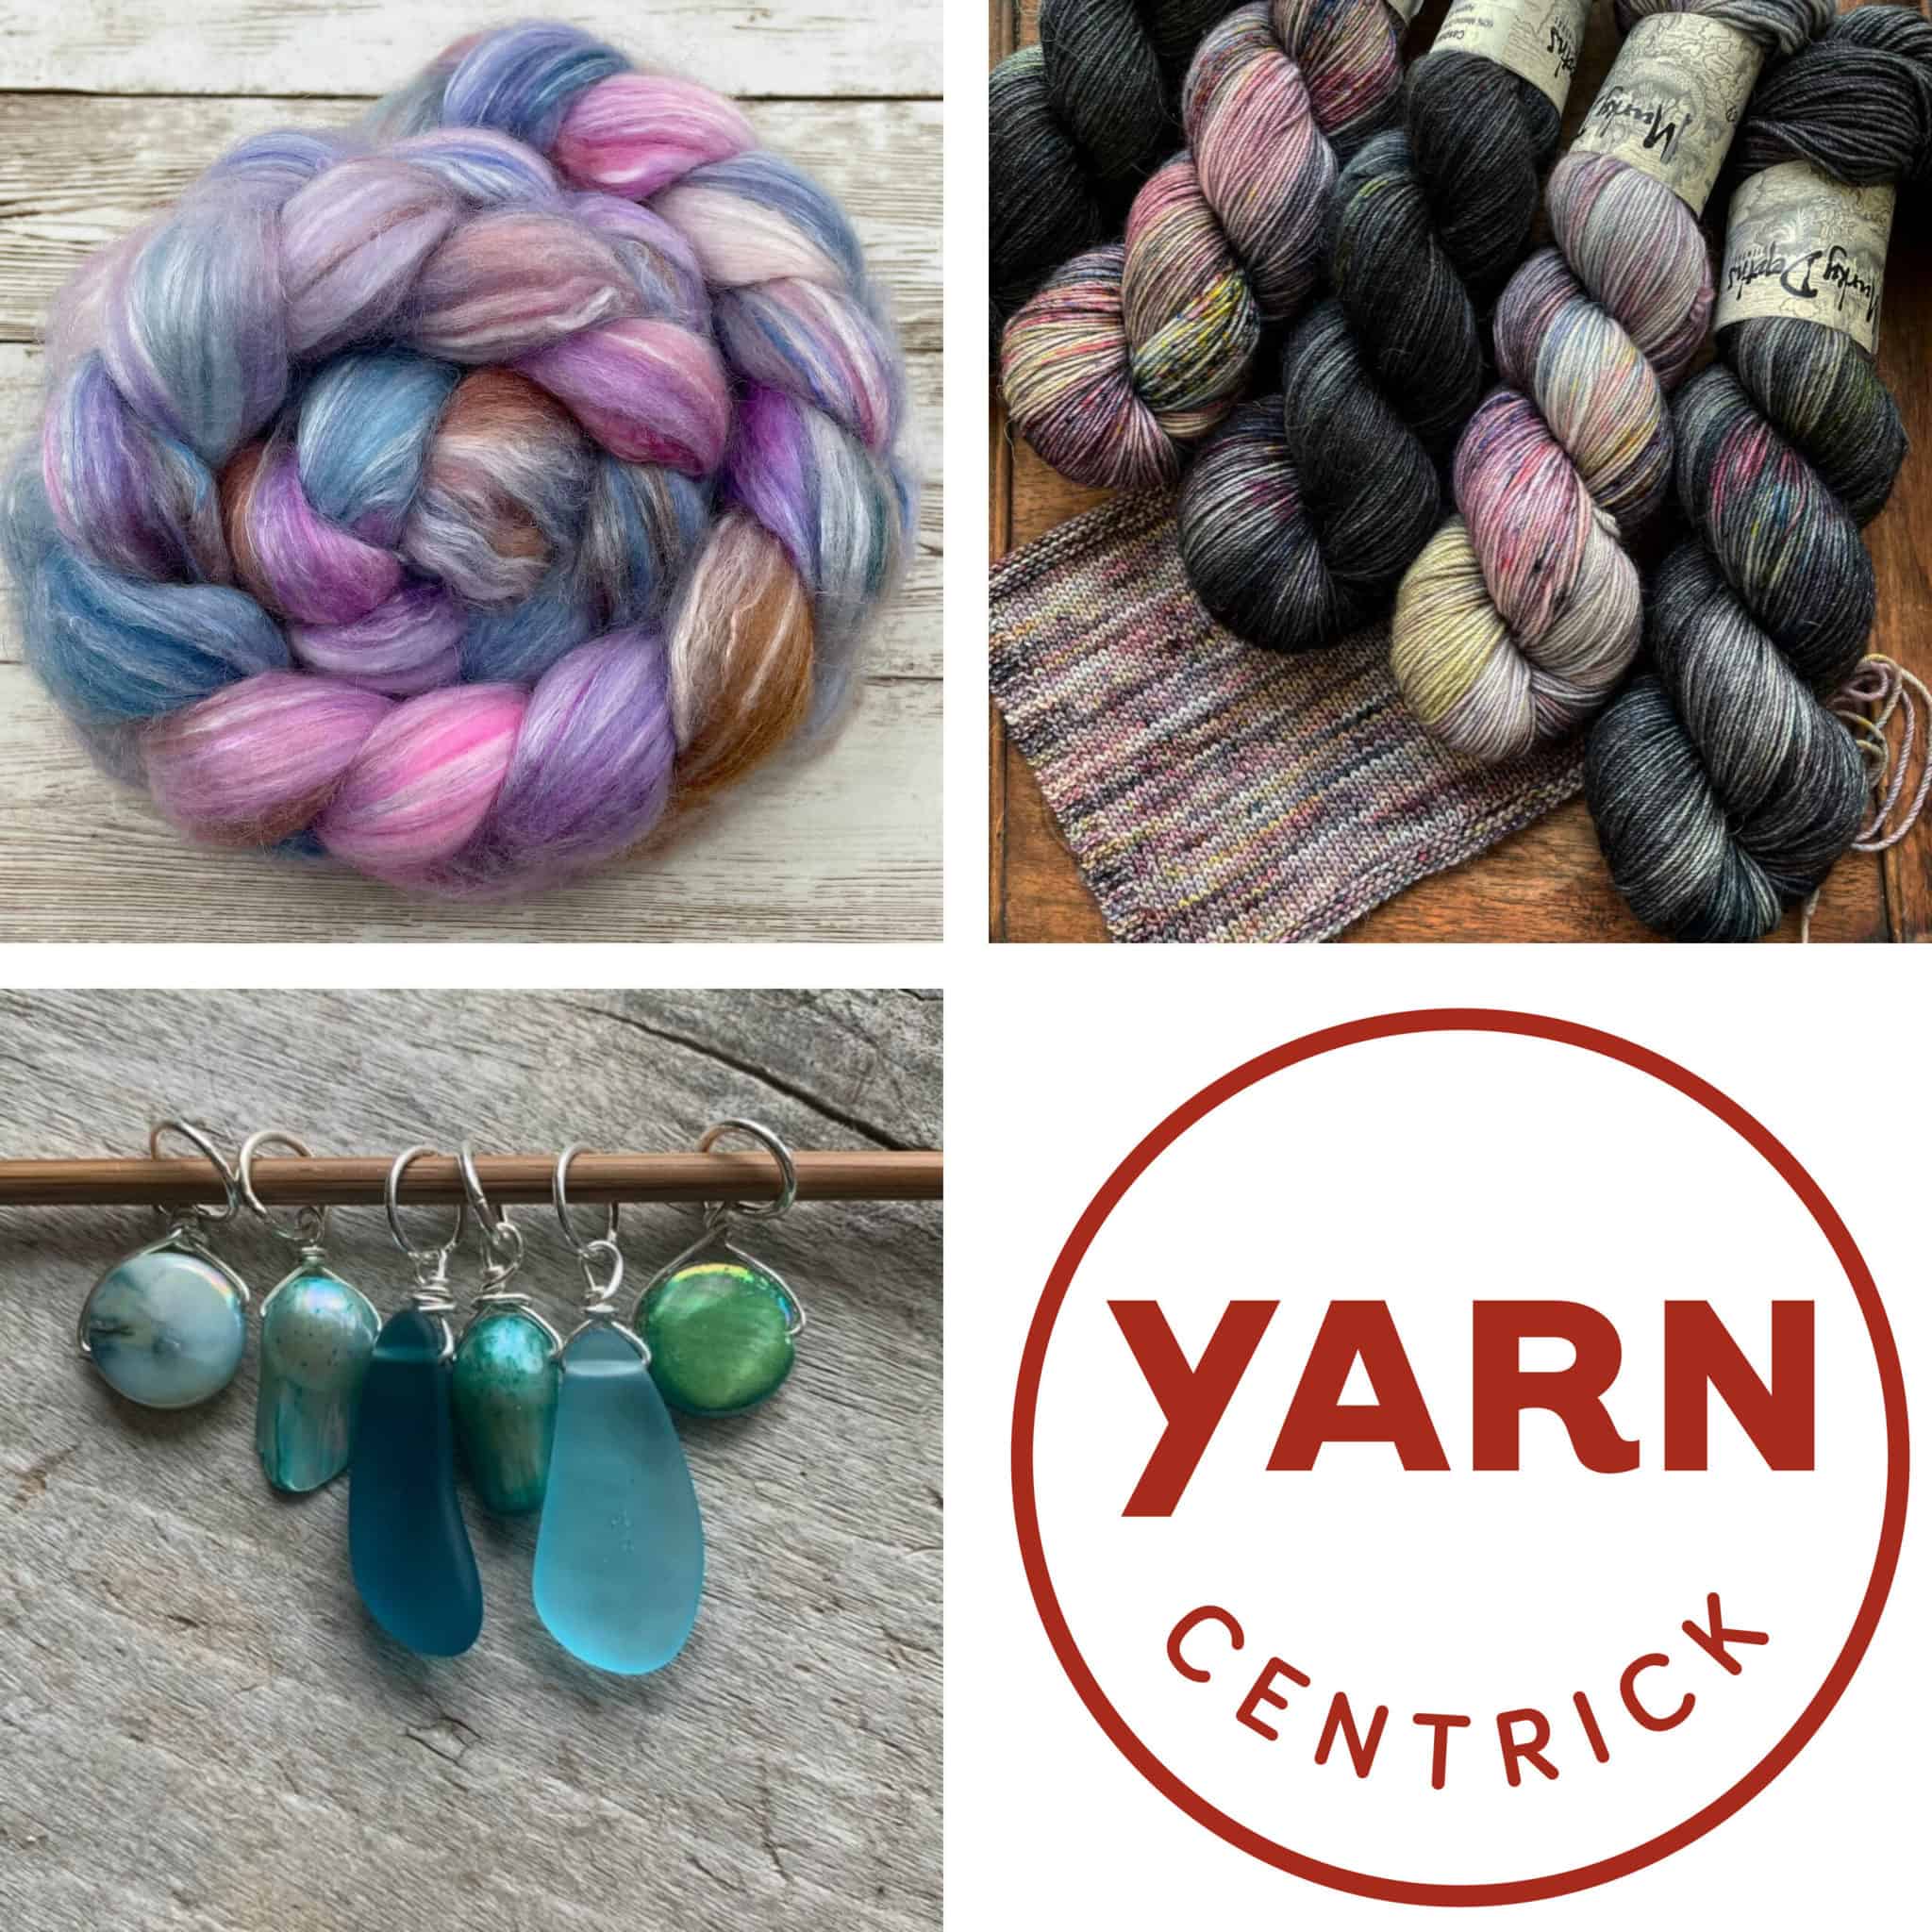 What to stash this week: Yarn-centric